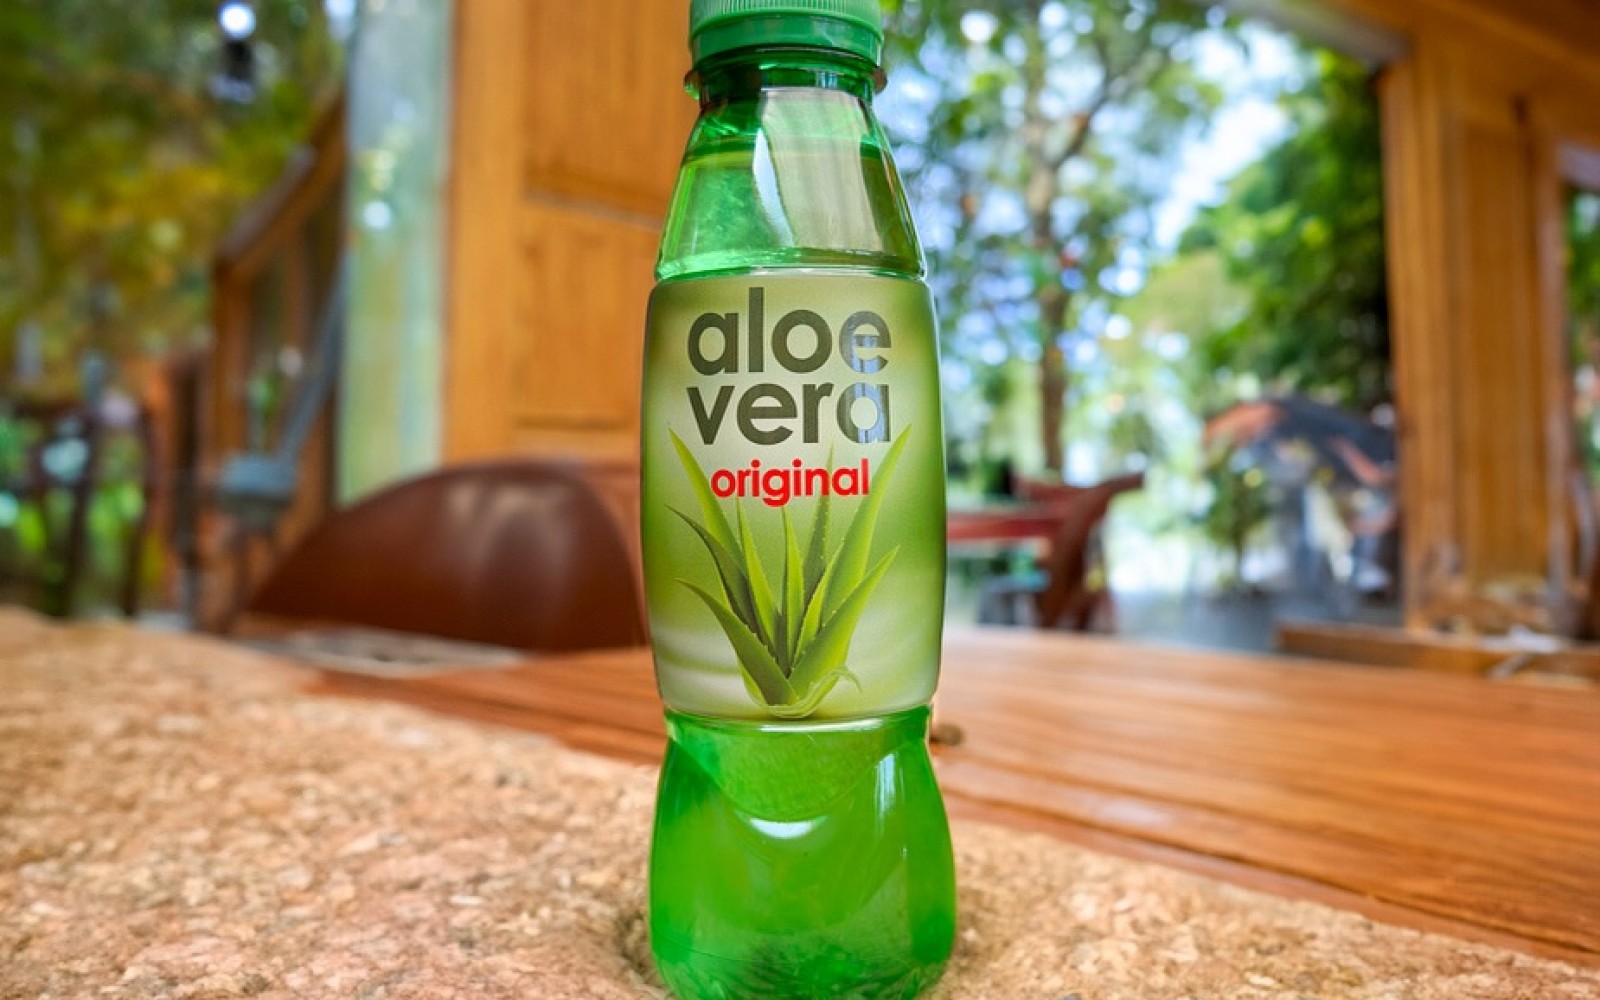 Did you know that the Aloe vera plant strengthens the immune system and improves digestion